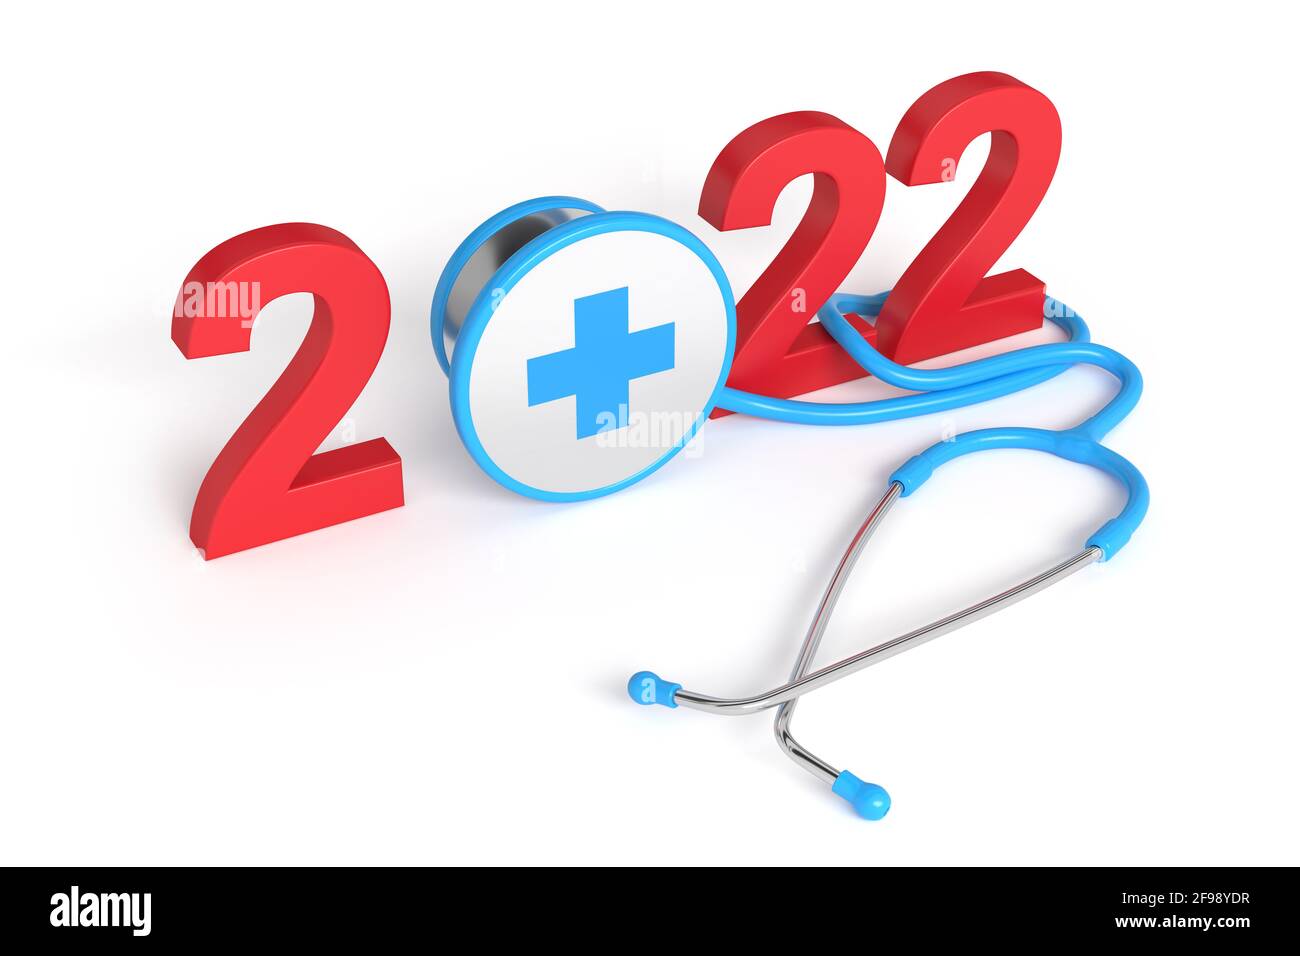 New Year 2022 Creative Design Concept with stethoscope - 3D Rendered Image Stock Photo